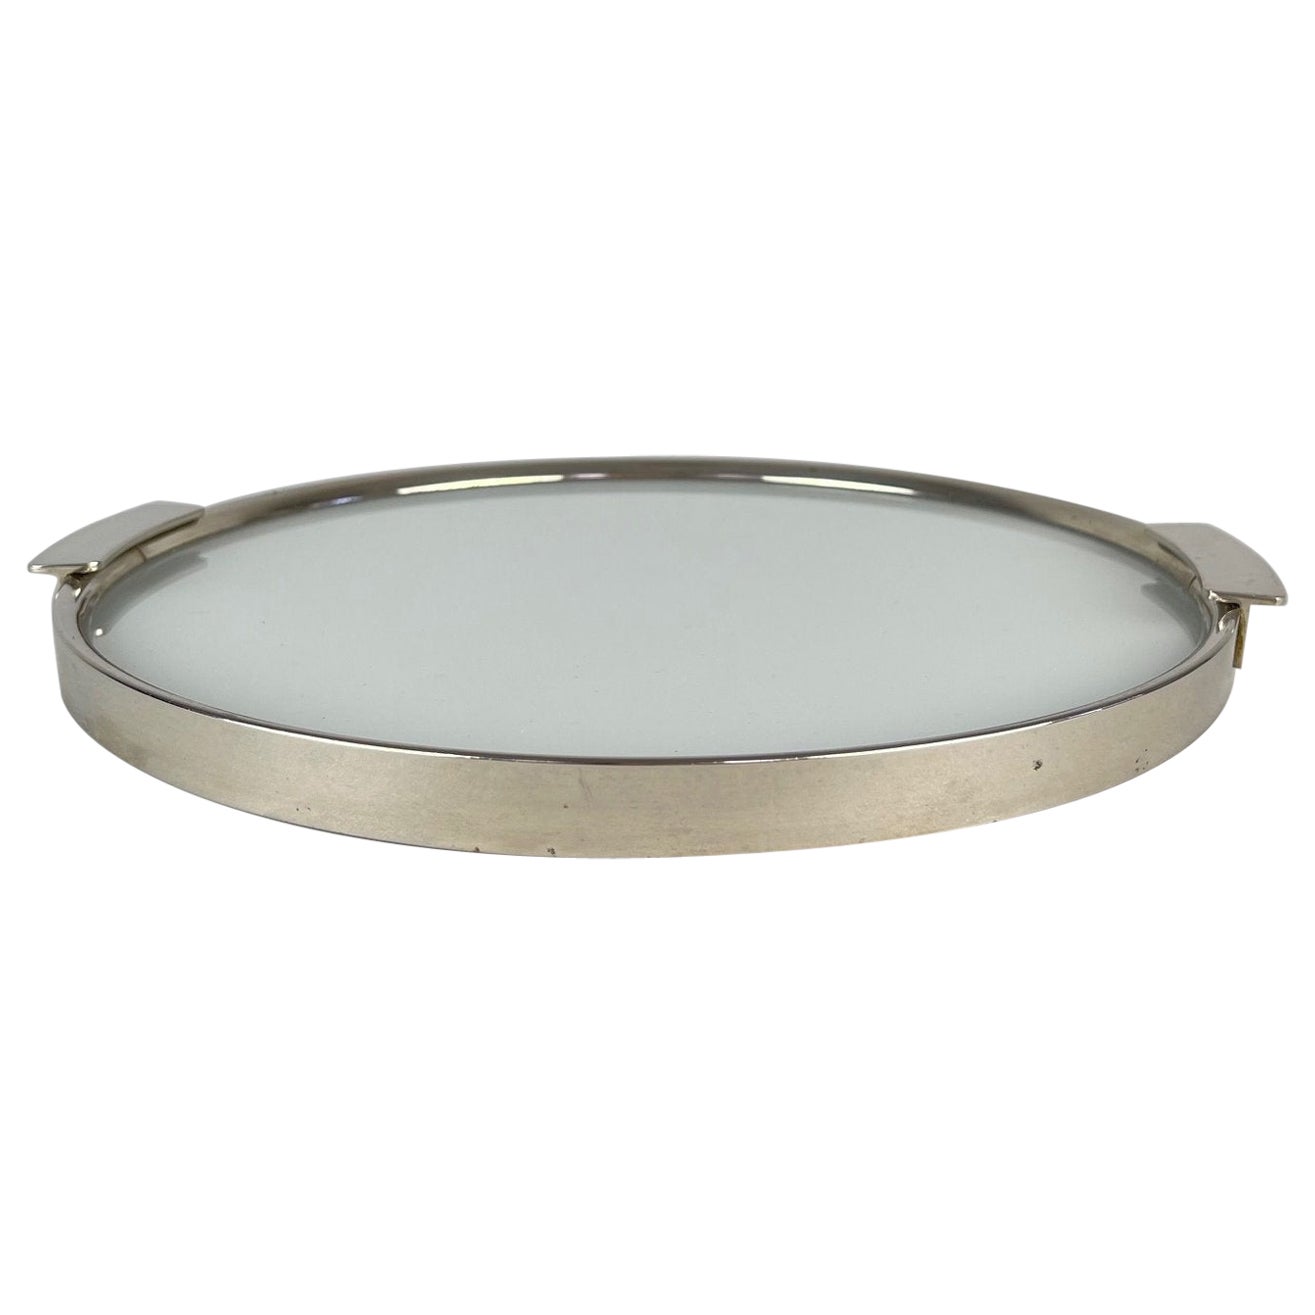 1930's Art Deco Chrome Round Tray For Sale